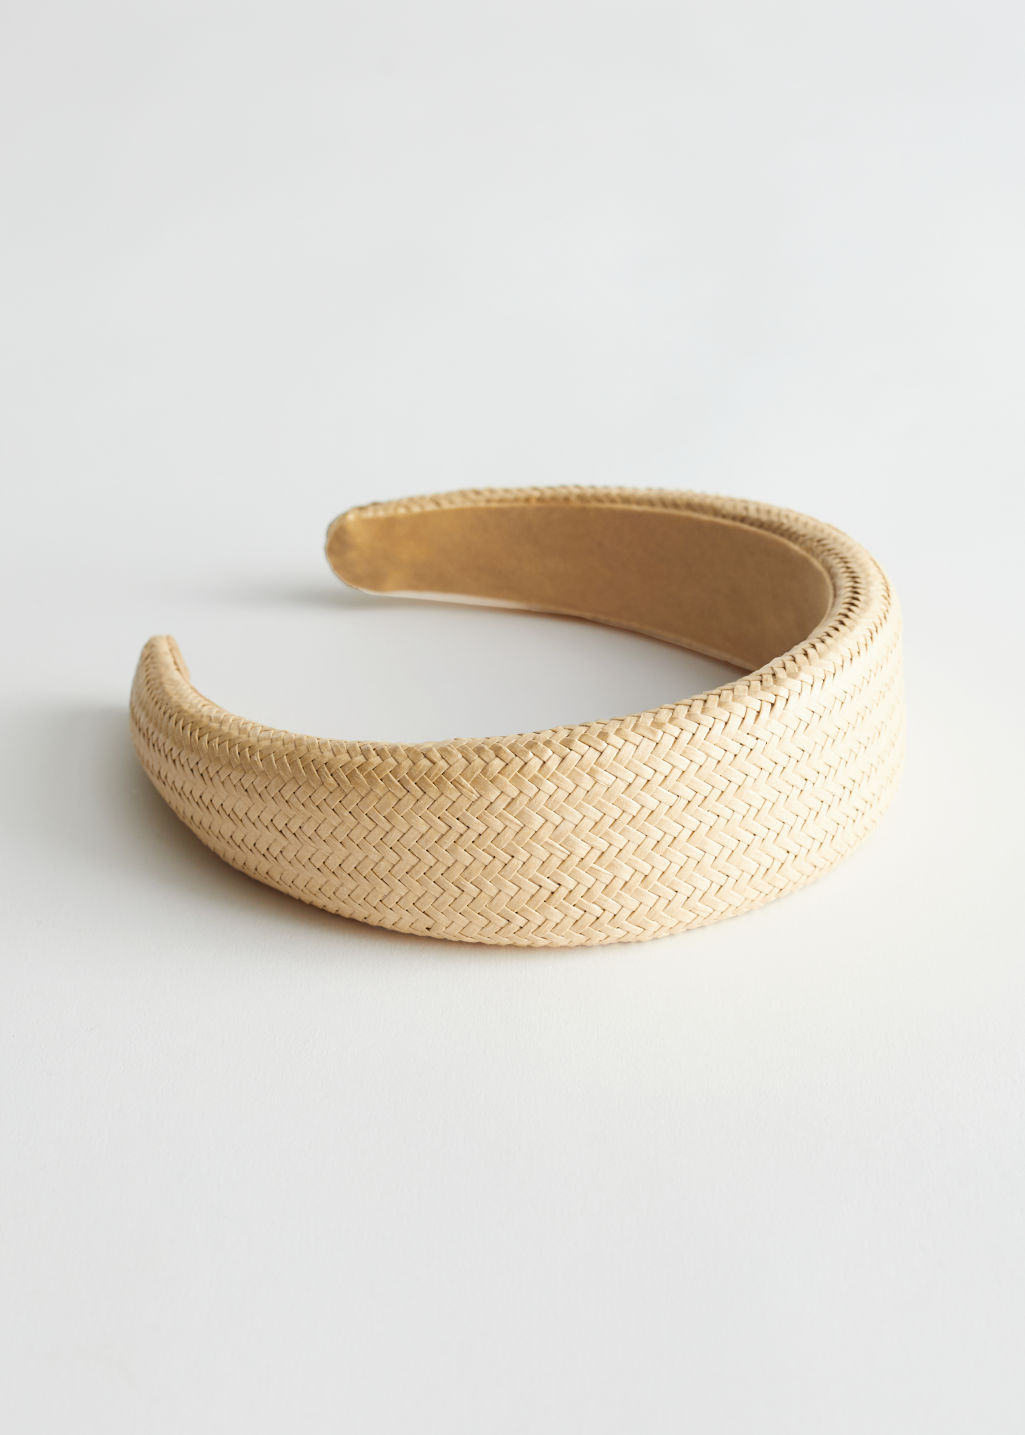 Woven Straw Alice Headband - Natural Straw - Hairaccessories - & Other Stories - Click Image to Close